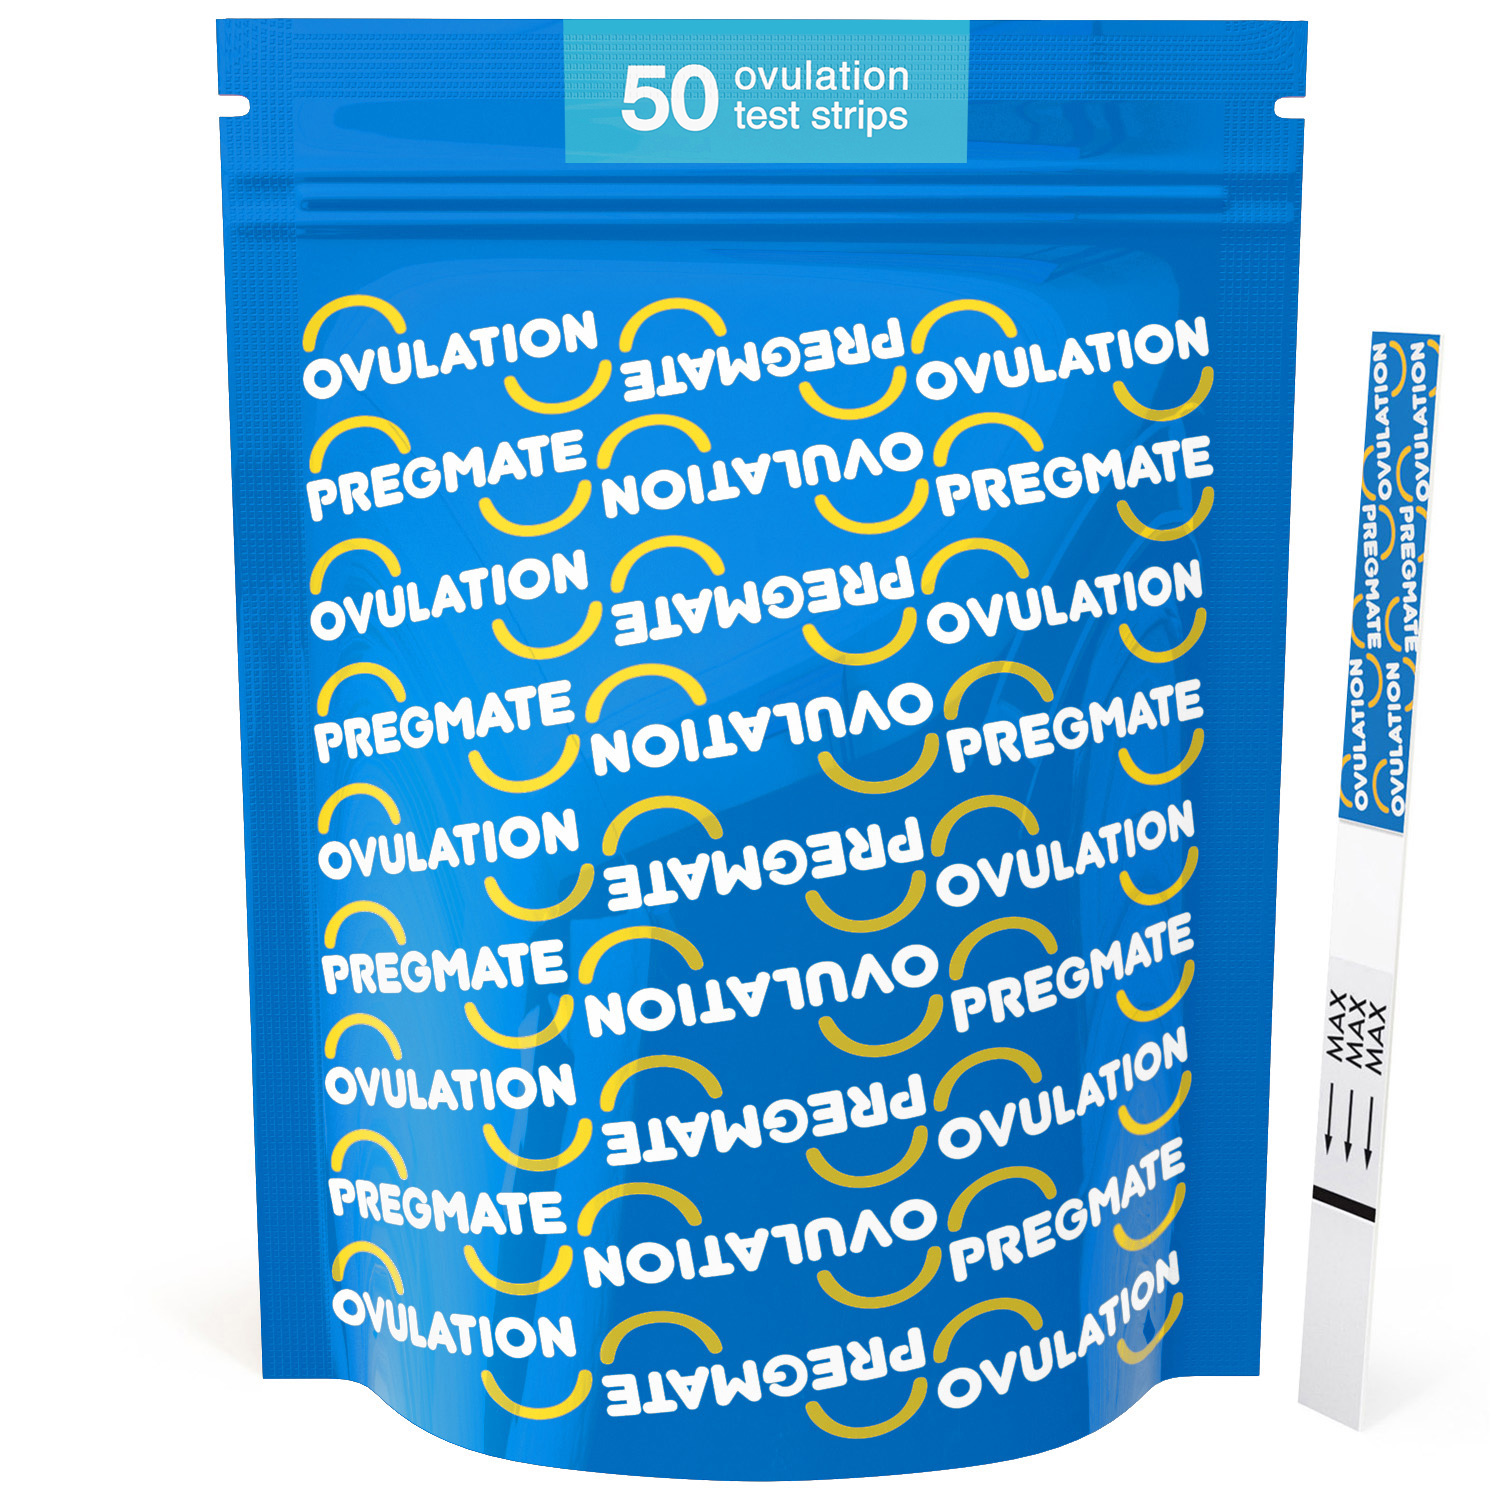 Pregmate 50 Ovulation Test Strips Predictor Kit (50 Count) - image 1 of 10